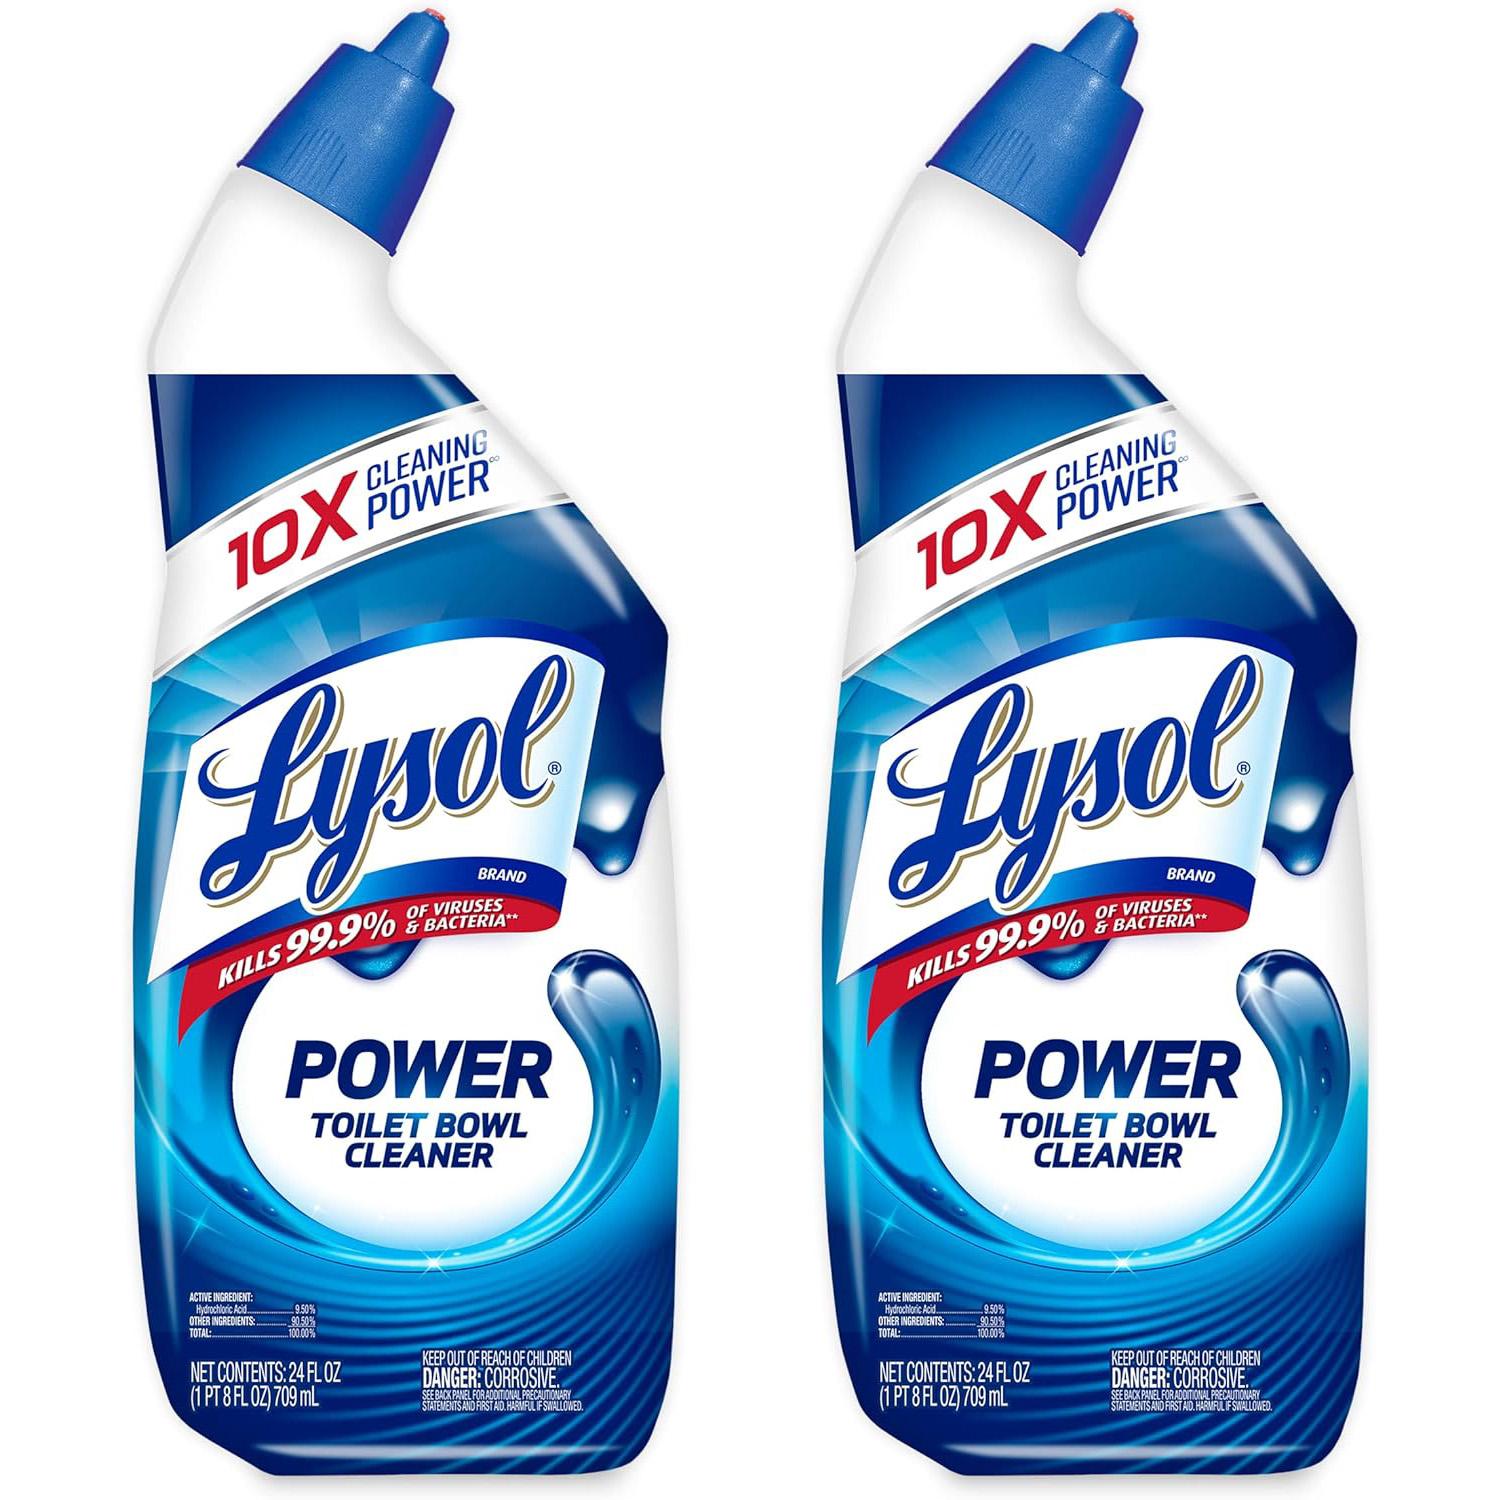 2 Lysol Power Toilet Bowl Cleaner for $2.18 Shipped